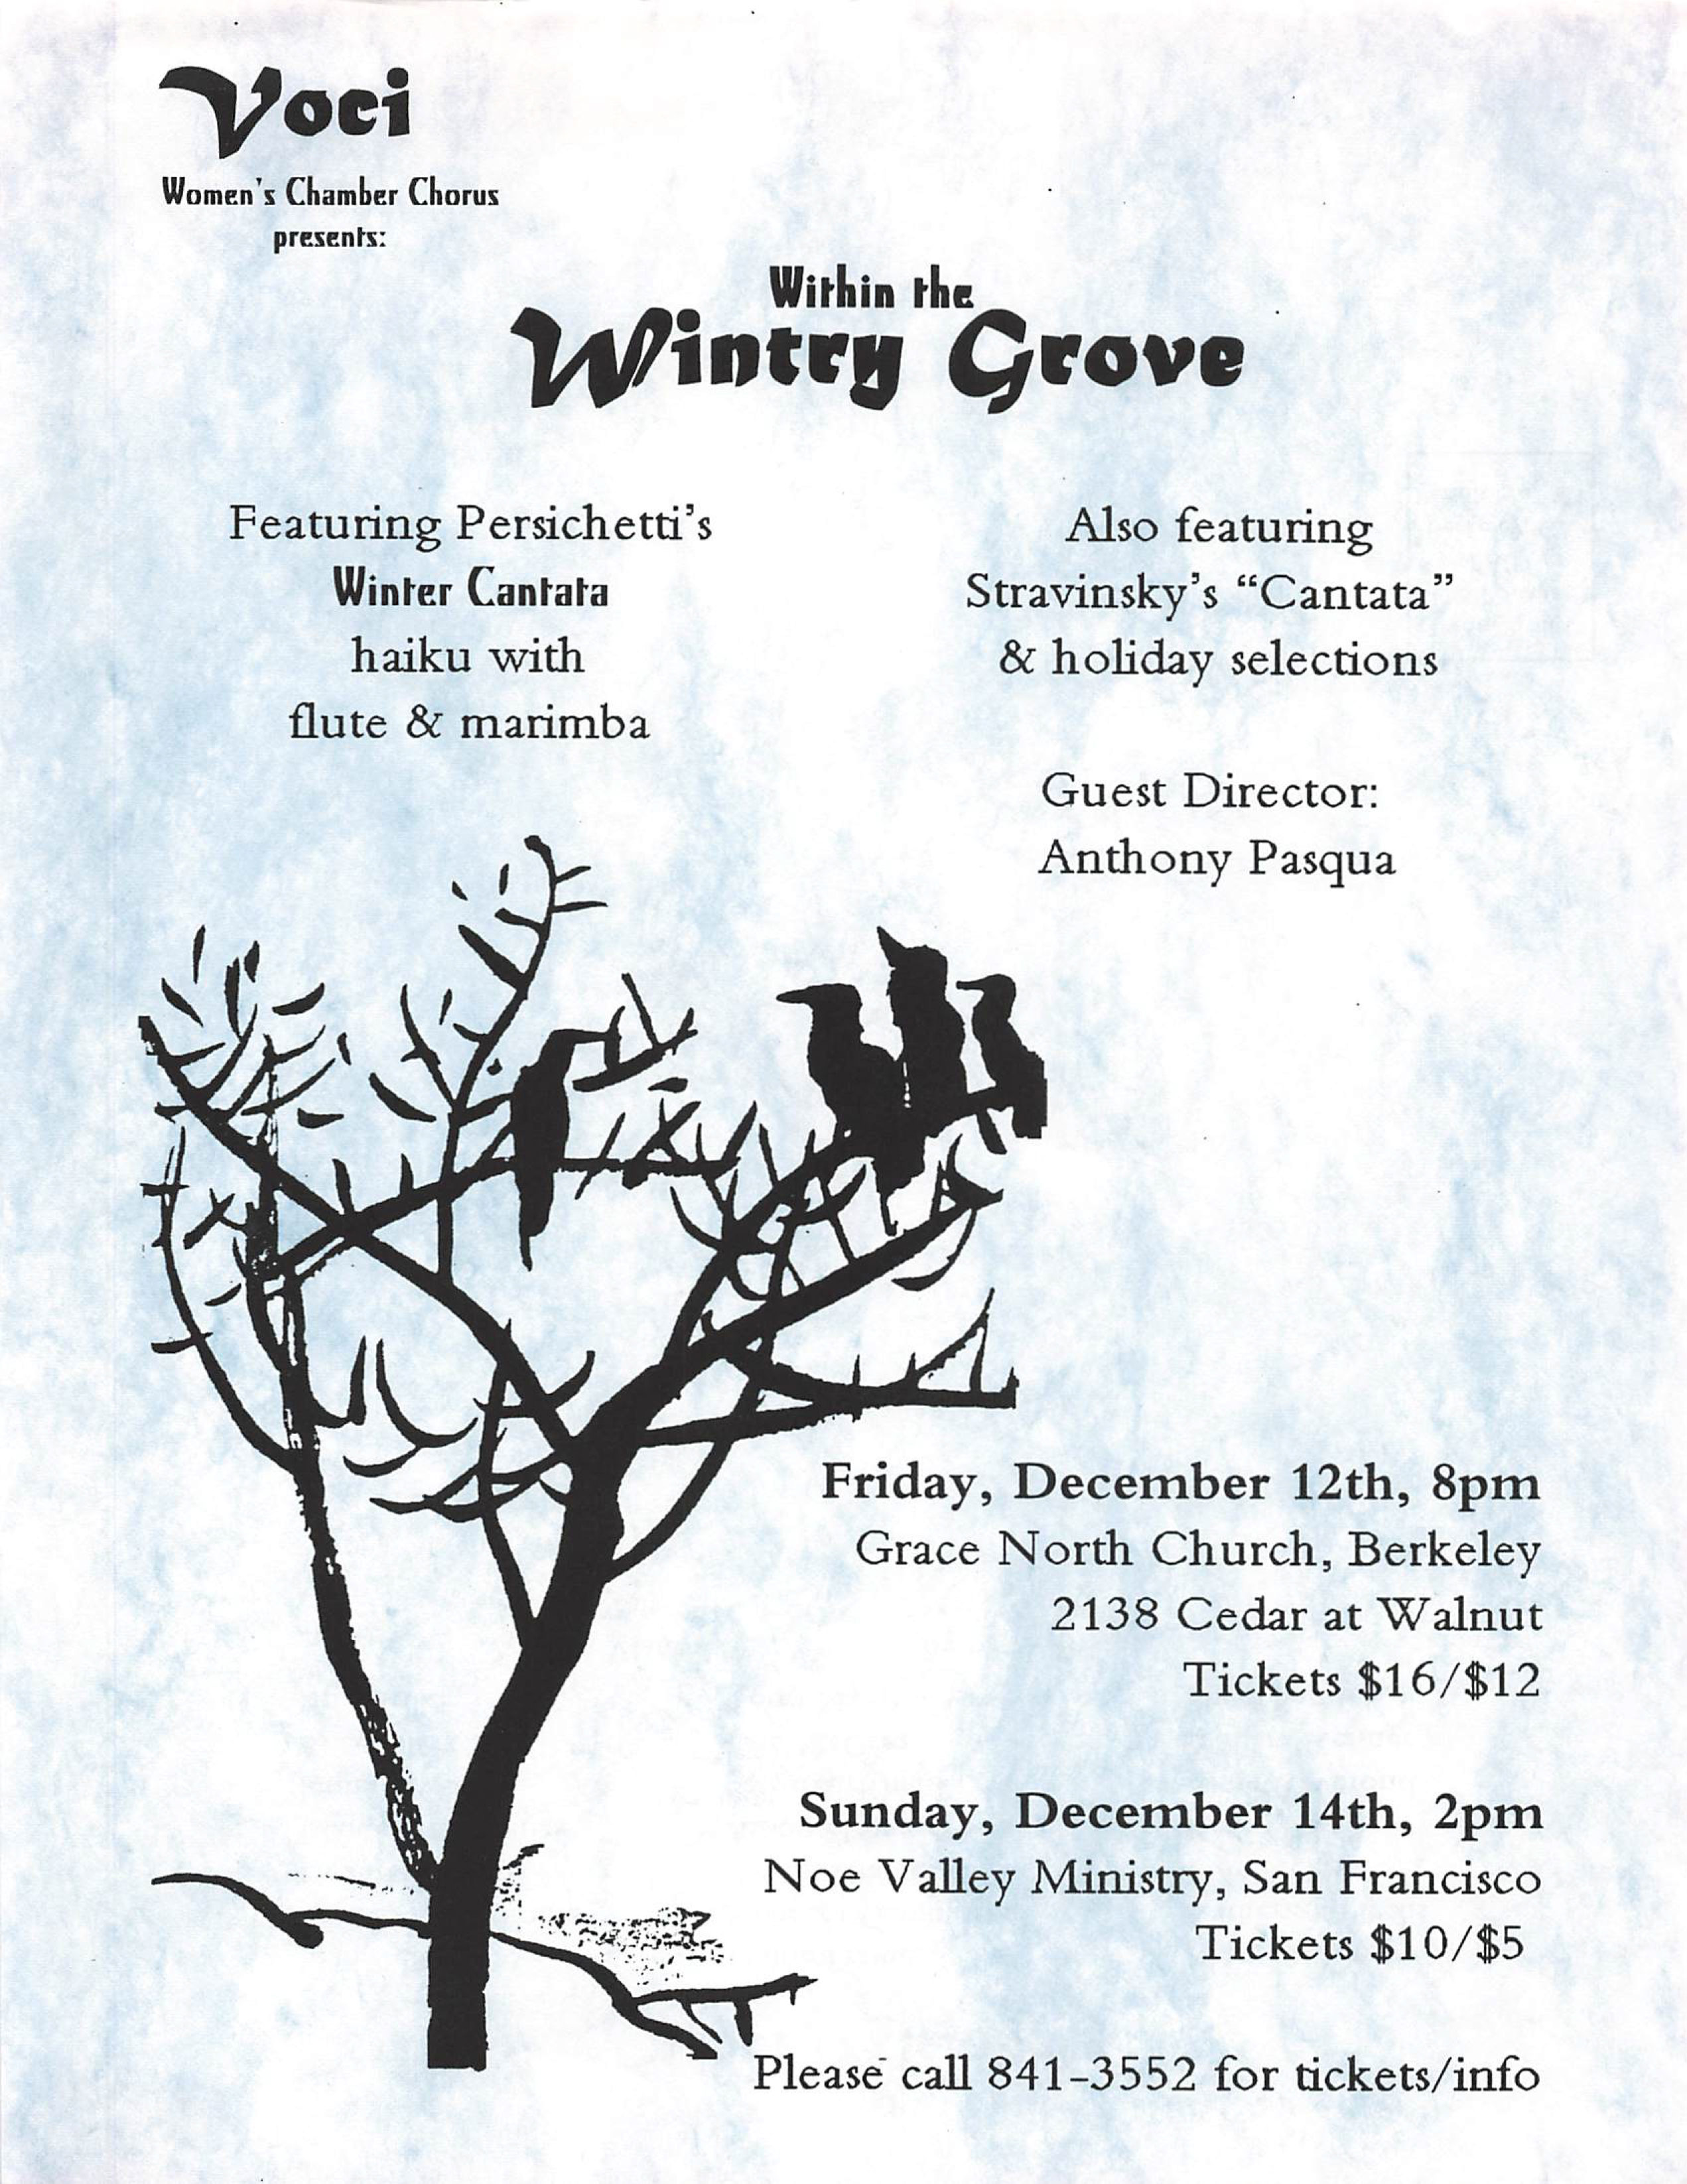 Within the Wintry Grove